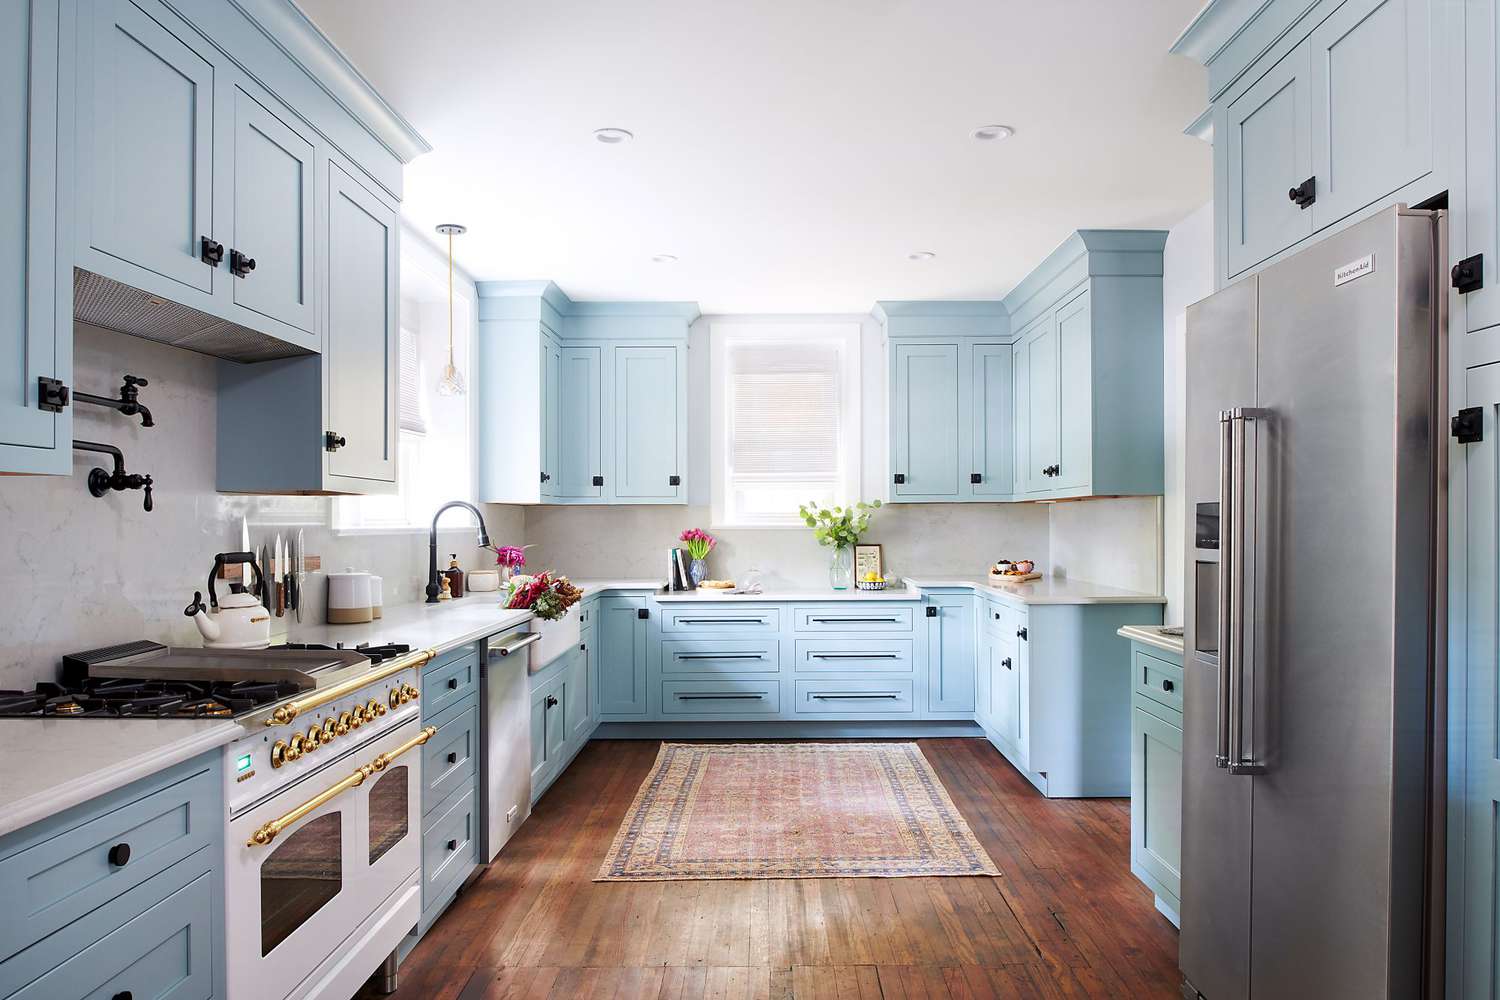 How to Pick Kitchen Paint Colors | Martha Stewart